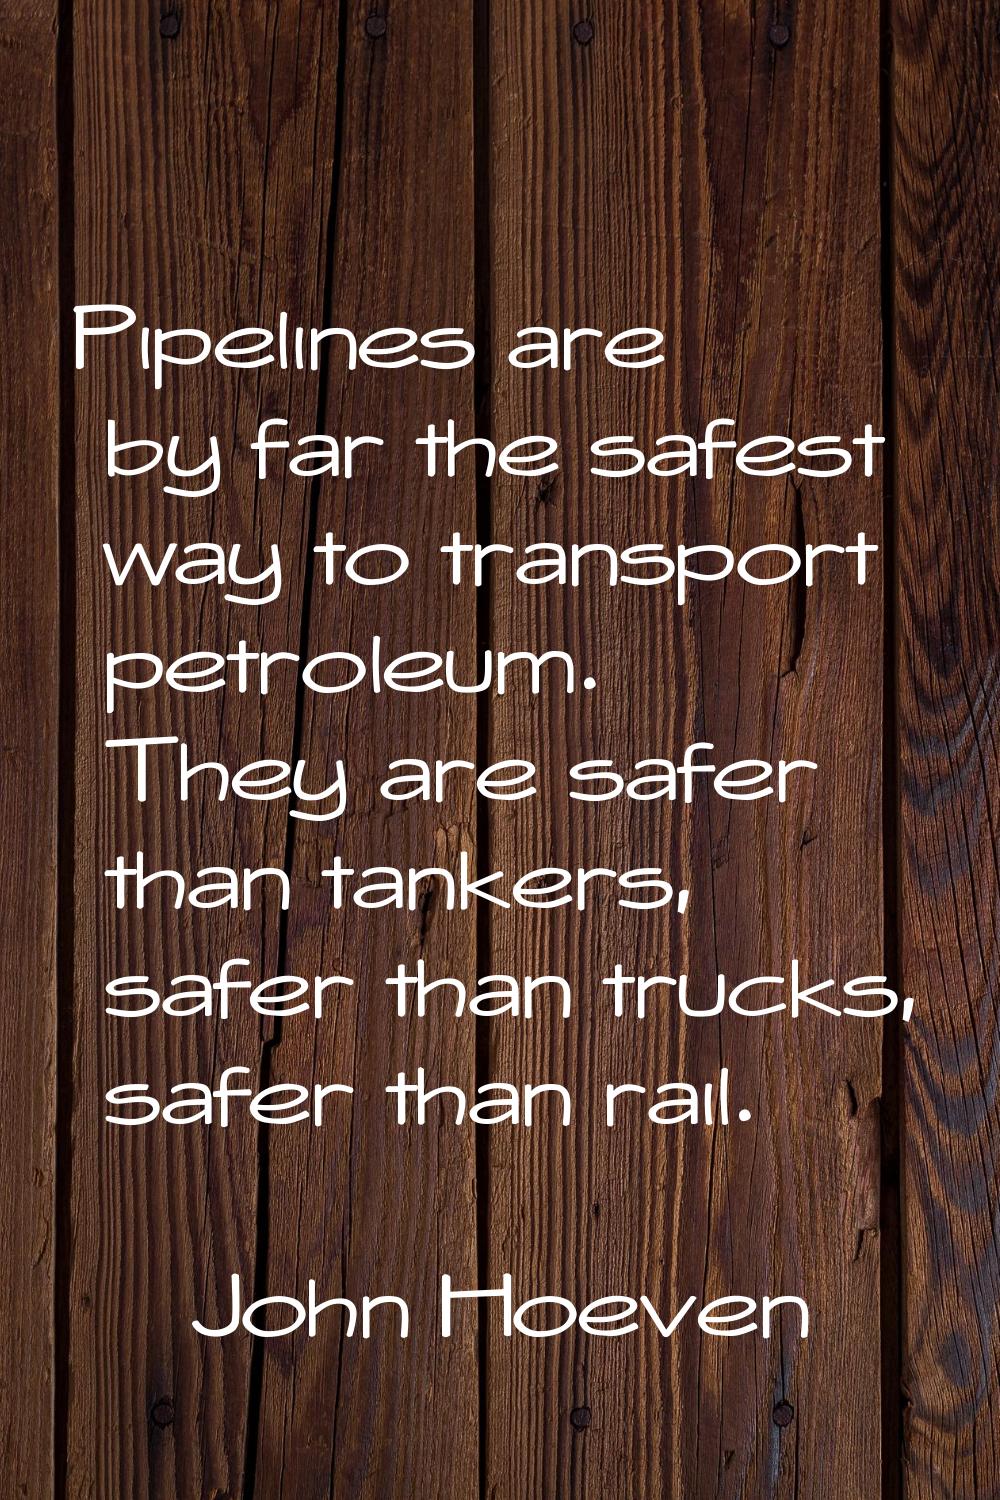 Pipelines are by far the safest way to transport petroleum. They are safer than tankers, safer than